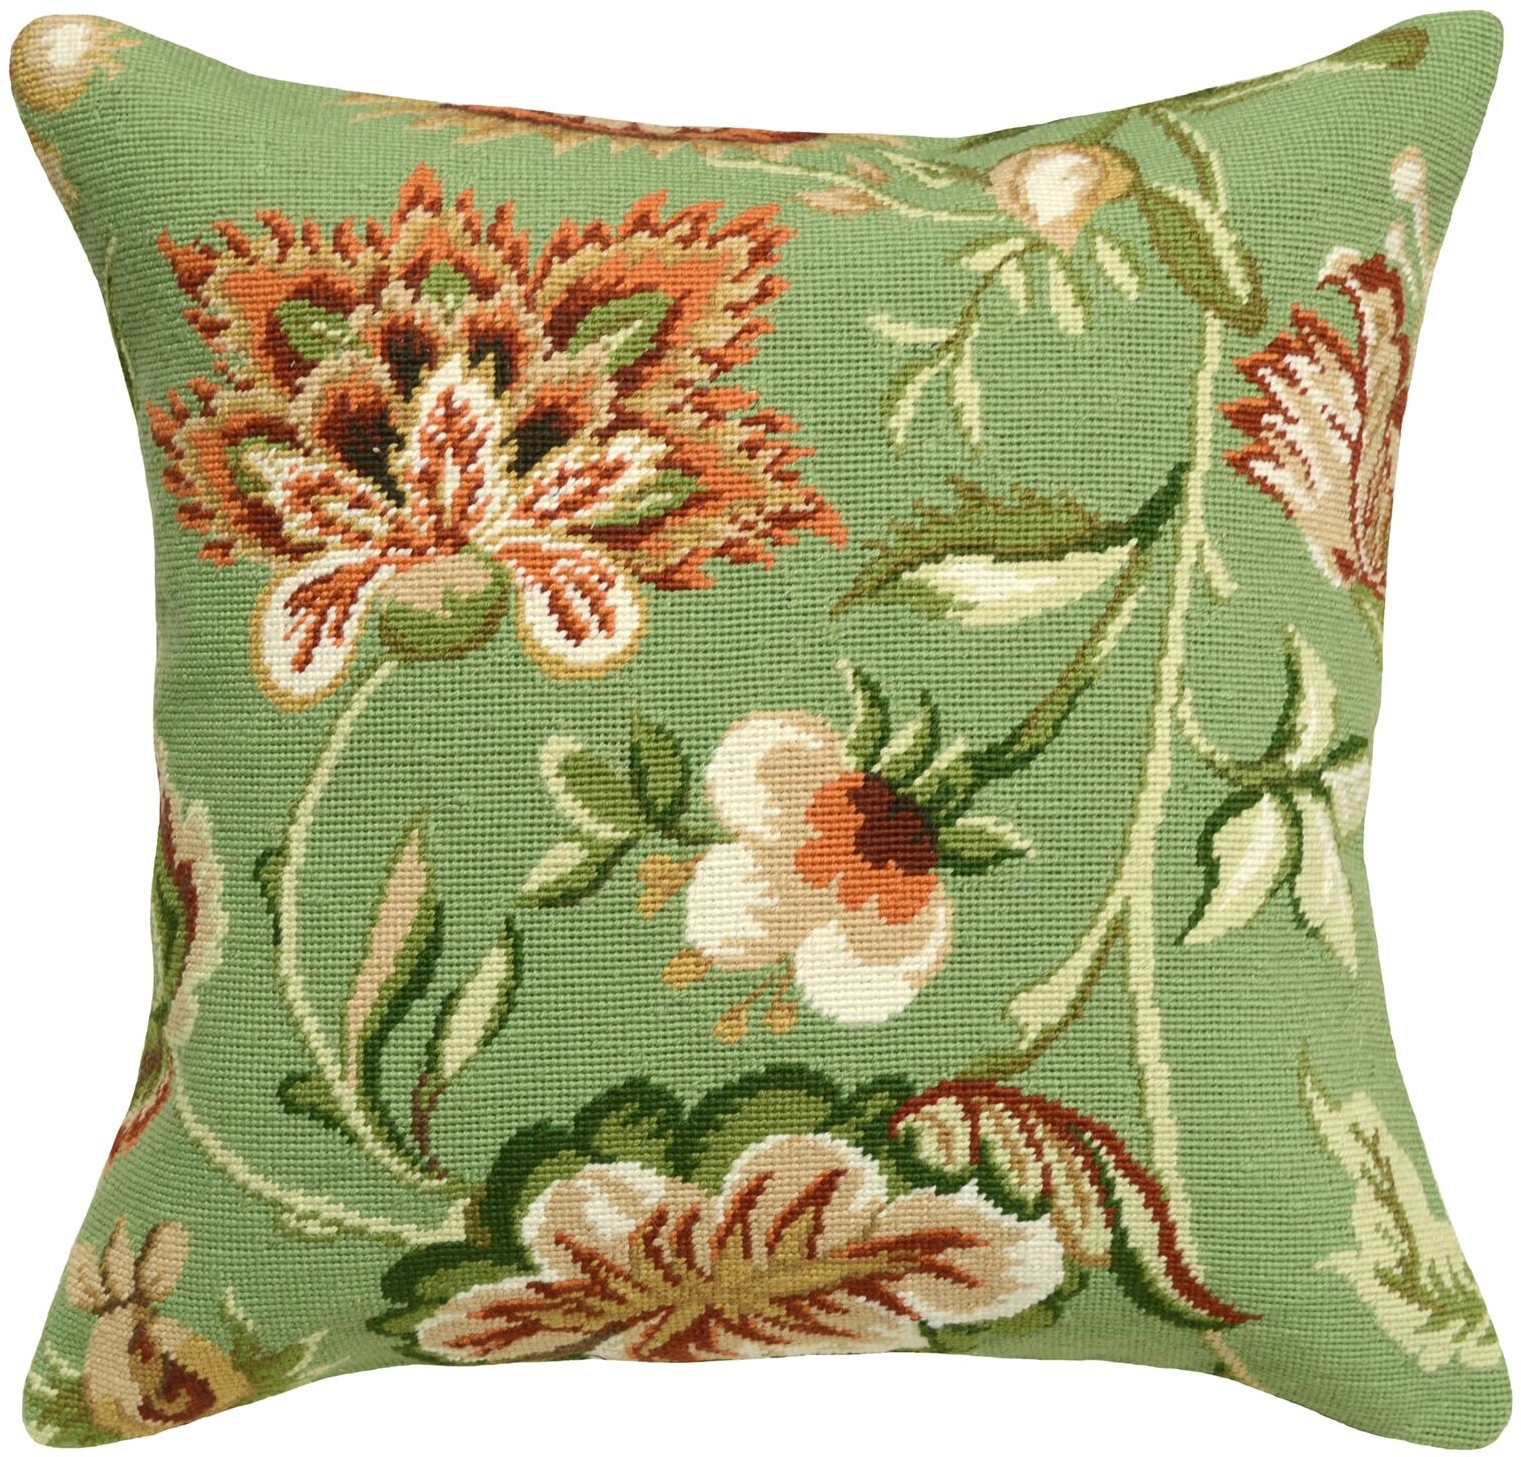 Throw Pillow Jacobean Floral Flowers 20x20 Green Wool Yarn Poly Rayon Insert-Image 1